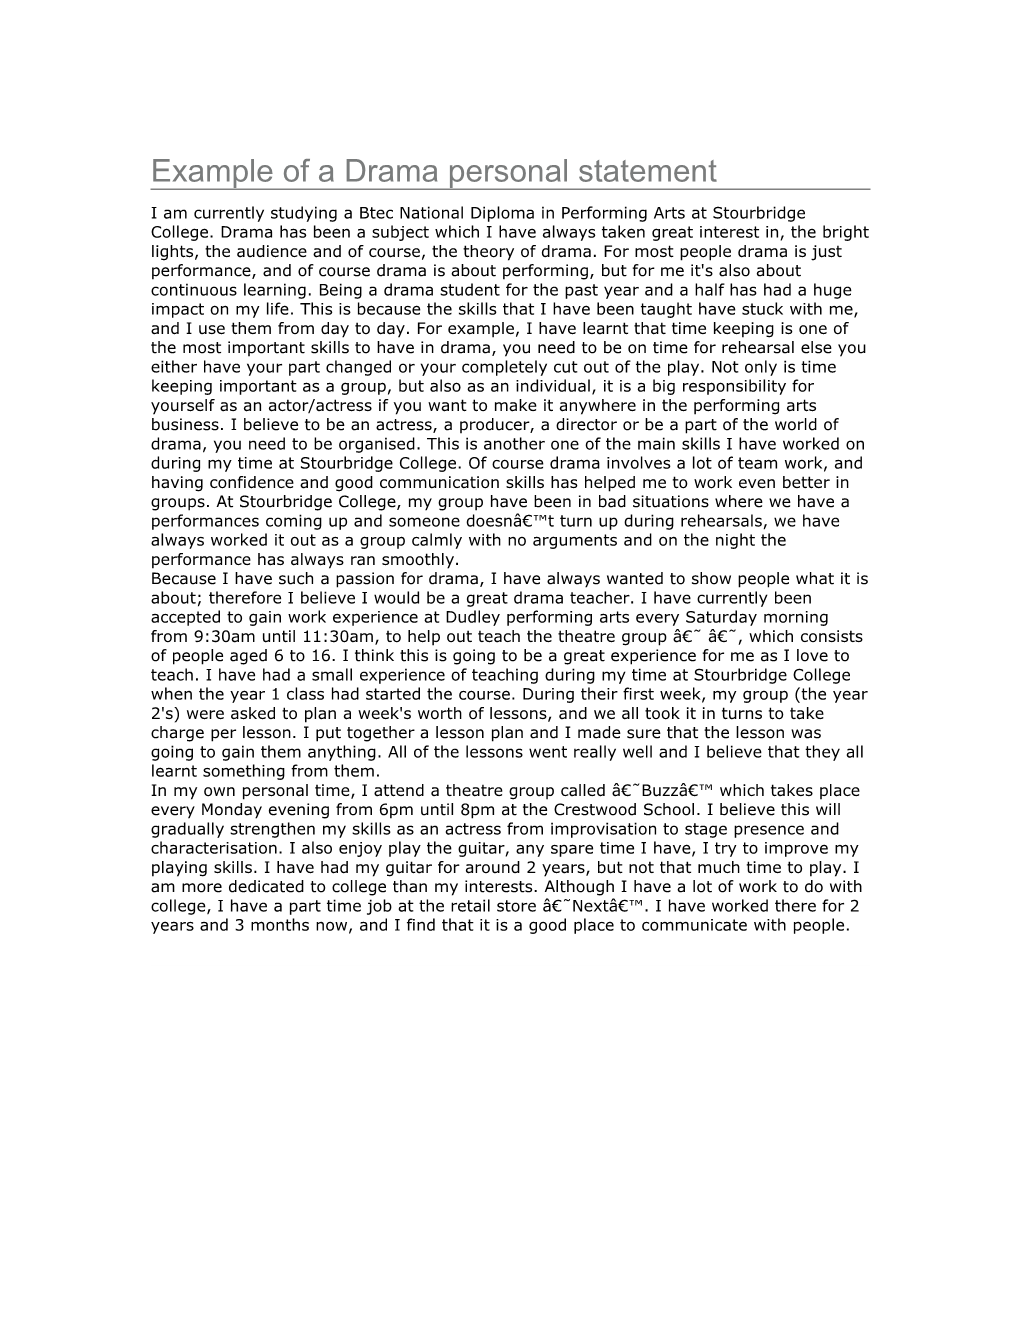 Example of a Drama Personal Statement